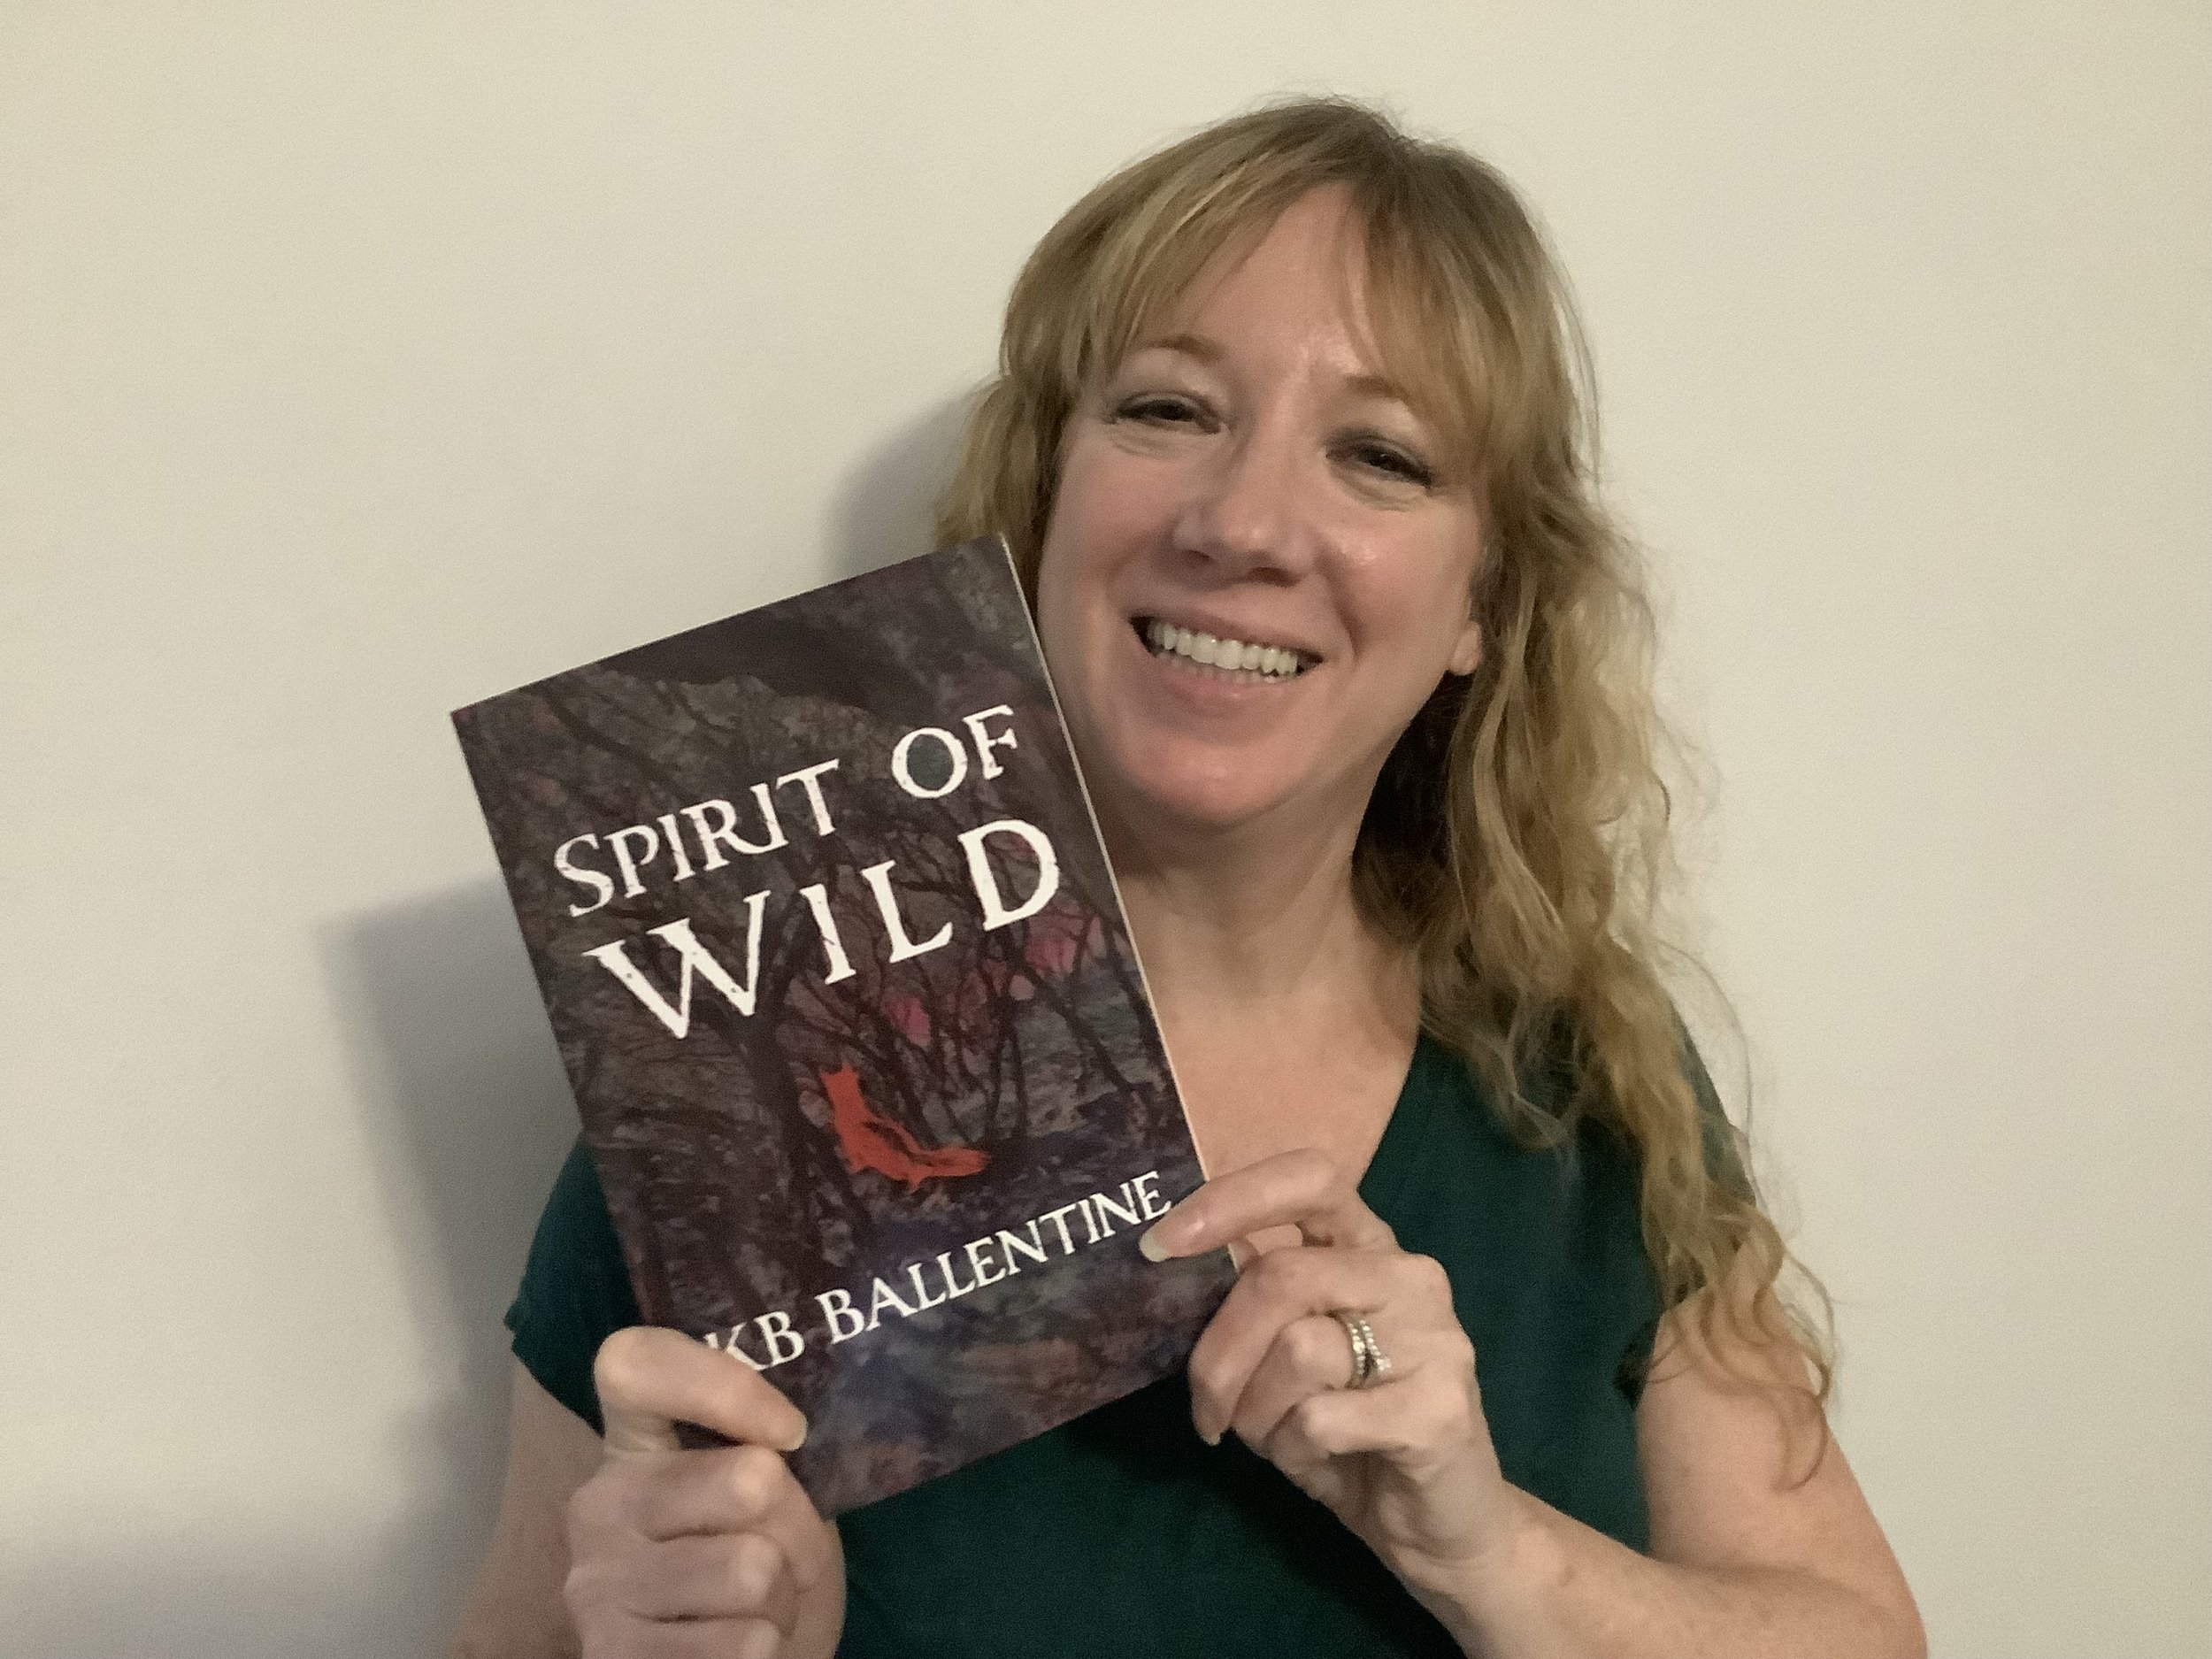 Home from the gym to find…Spirit of Wild!